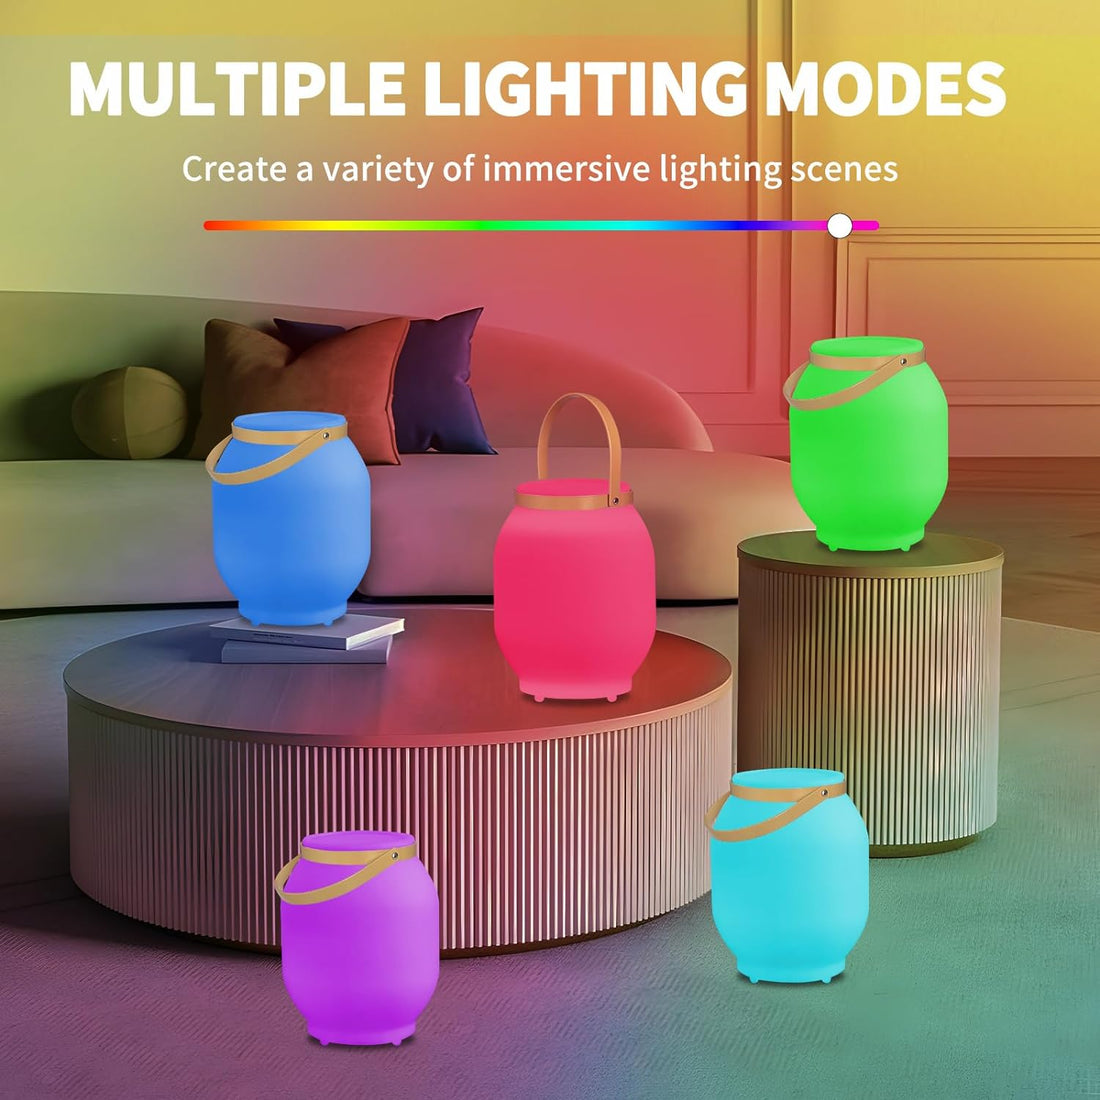 HvaJvny LED Table Lamp with Bluetooth Speaker, Portable Cordless RGB Desk Lamp, Hanging Color Changing Lamp, Smart Table Lamp for Bedroom/Nightstand/Home/Living Room